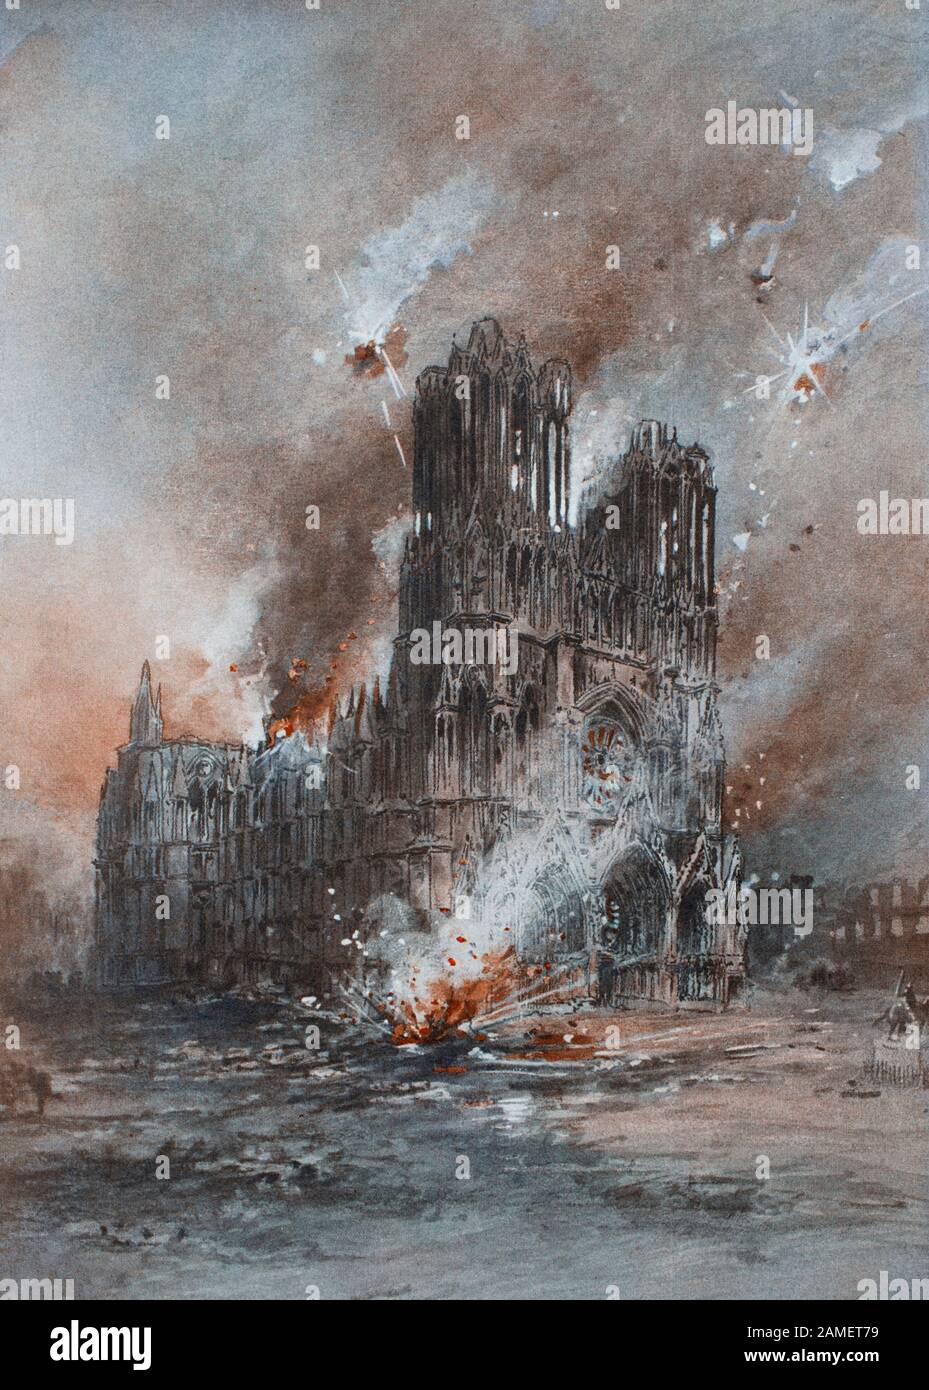 The Reims Cathedral on fire. The Destruction of the Cathedral of Reims, 1914. By G. Fraipont On 20 September 1914, German shellfire burned, damaged an Stock Photo